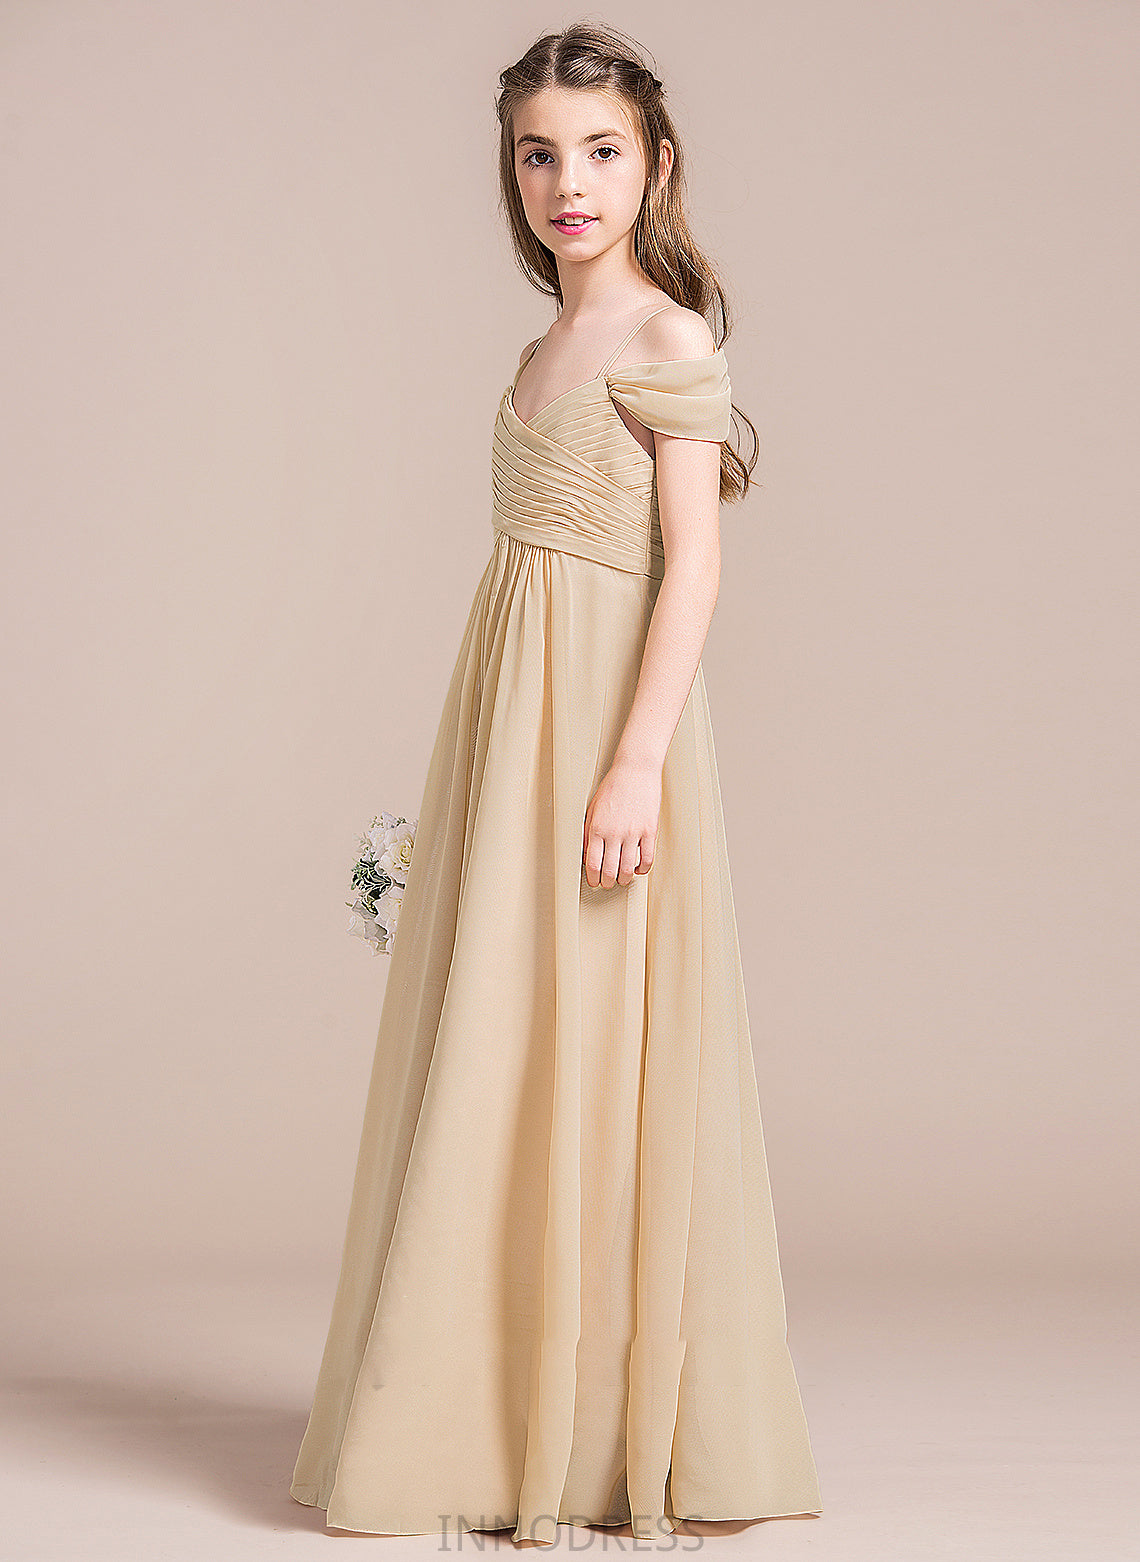 Chiffon Floor-Length A-Line Ruffle Junior Bridesmaid Dresses Off-the-Shoulder With Leslie